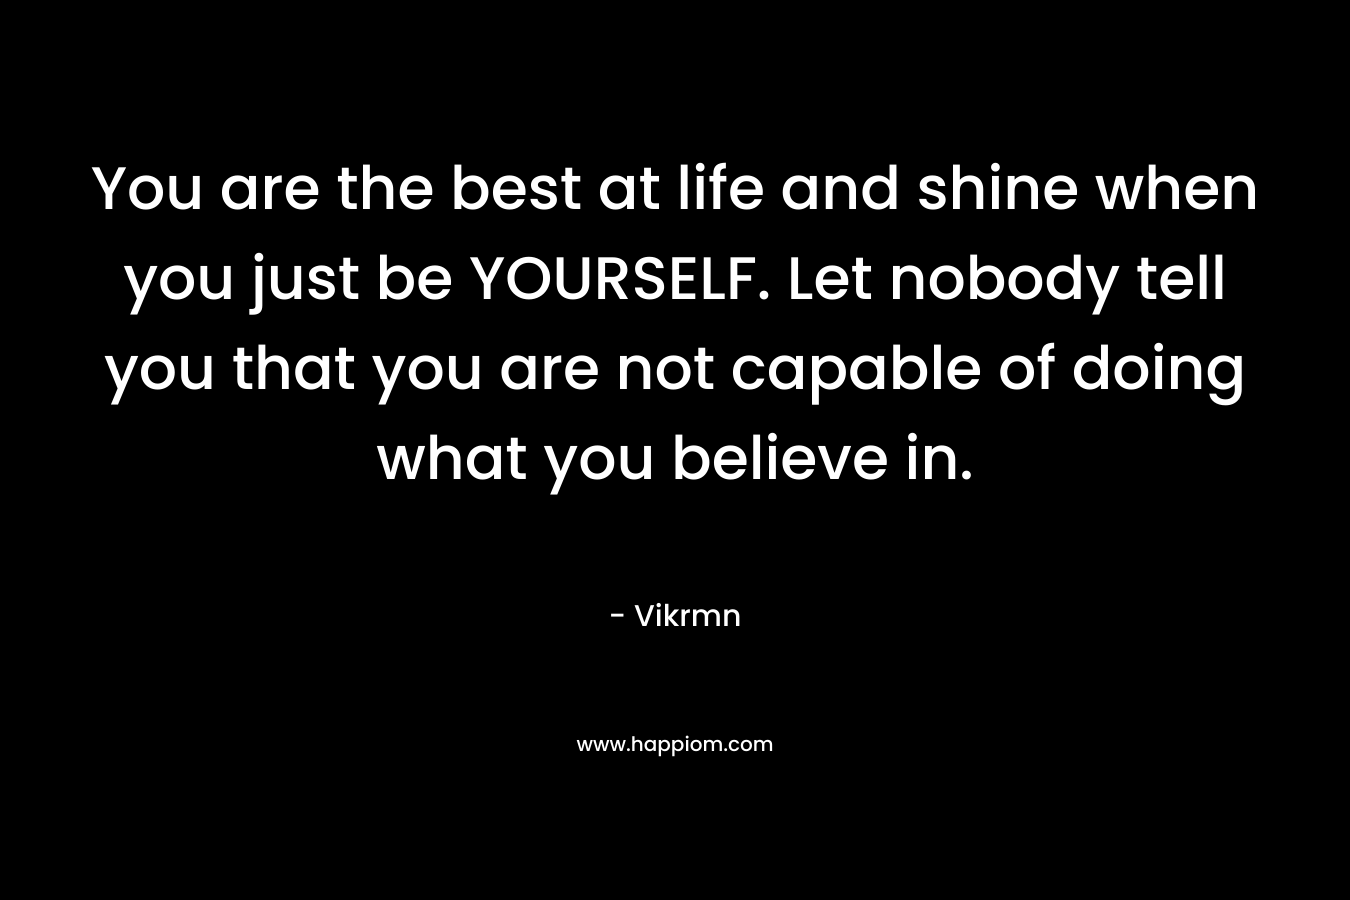 You are the best at life and shine when you just be YOURSELF. Let nobody tell you that you are not capable of doing what you believe in.